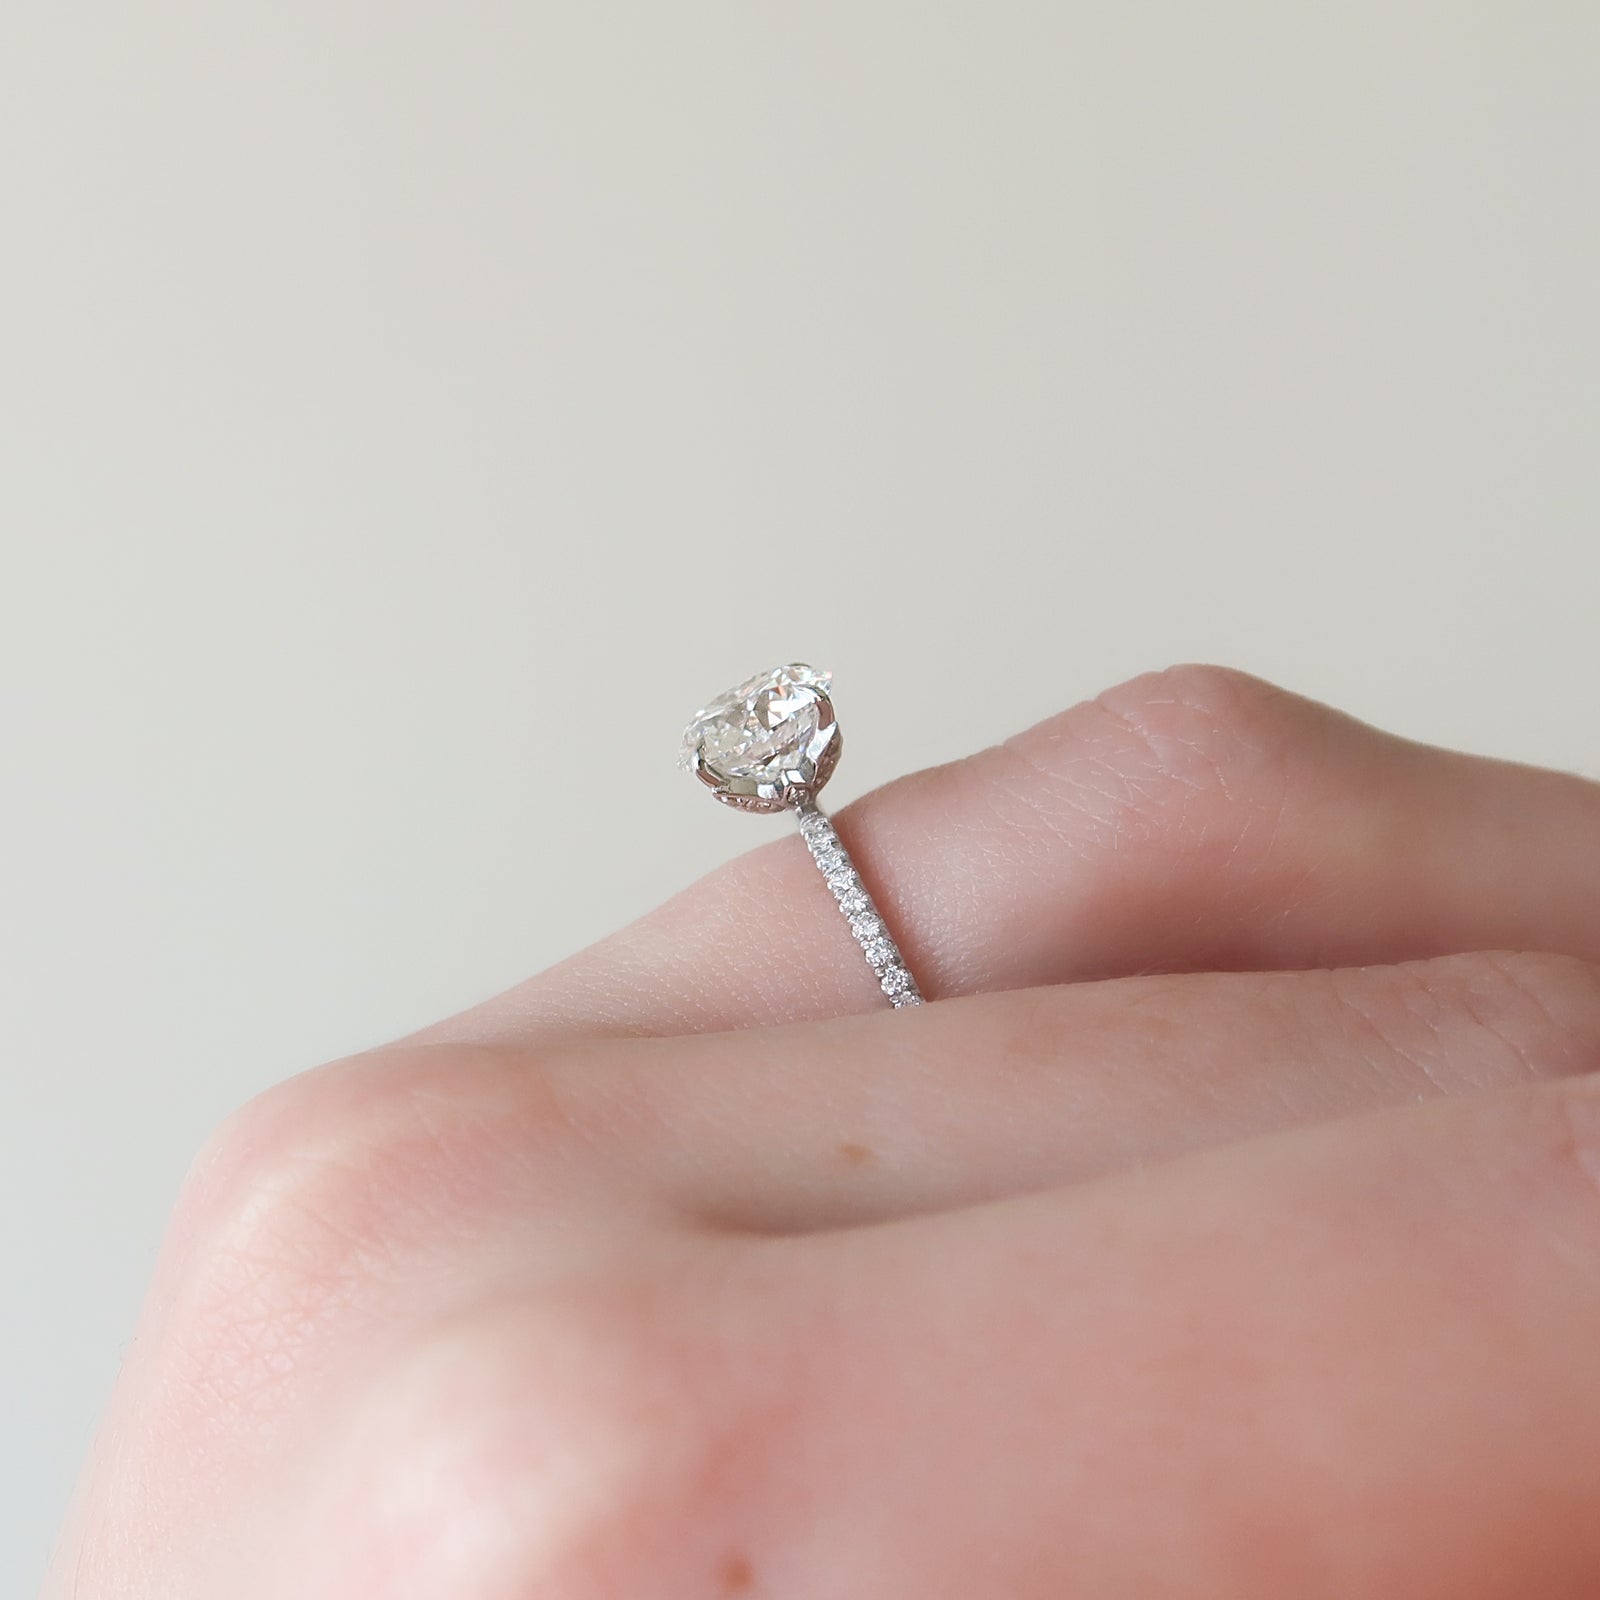 The Pave Lily WG R data-carat=2.5 data-metal=white-gold